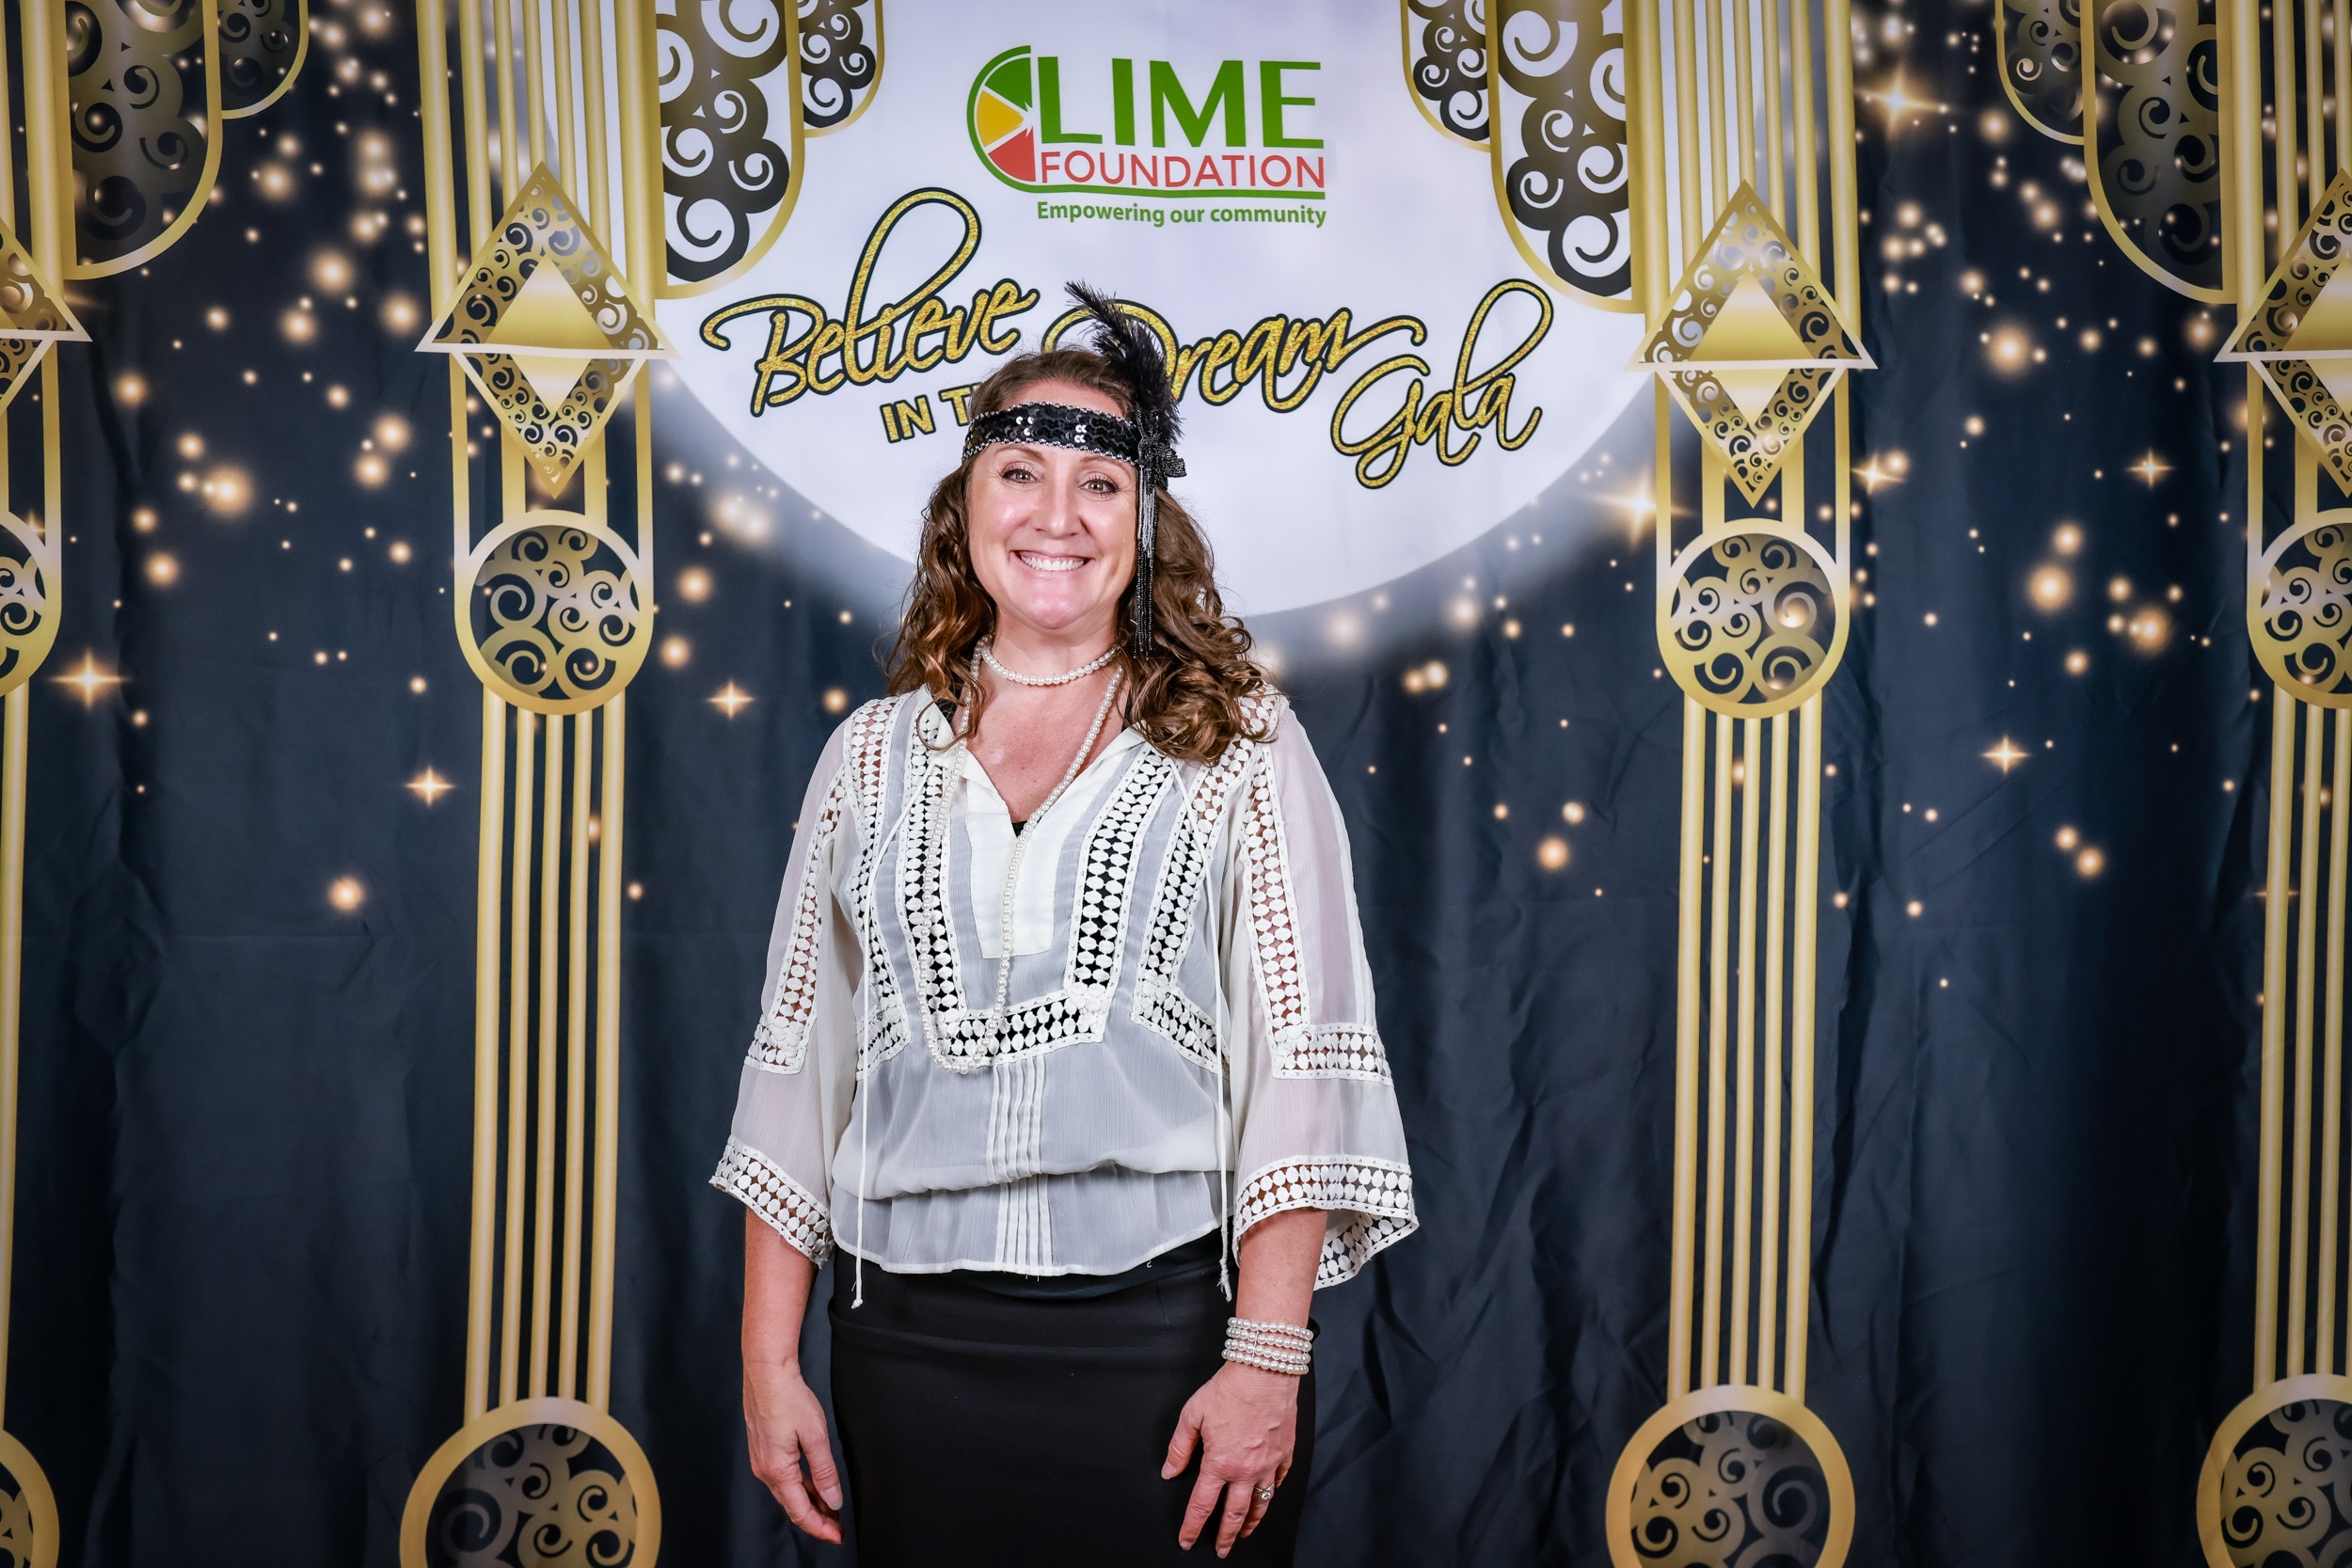 A woman posing for a photo in front of The LIME Foundation backdrop.